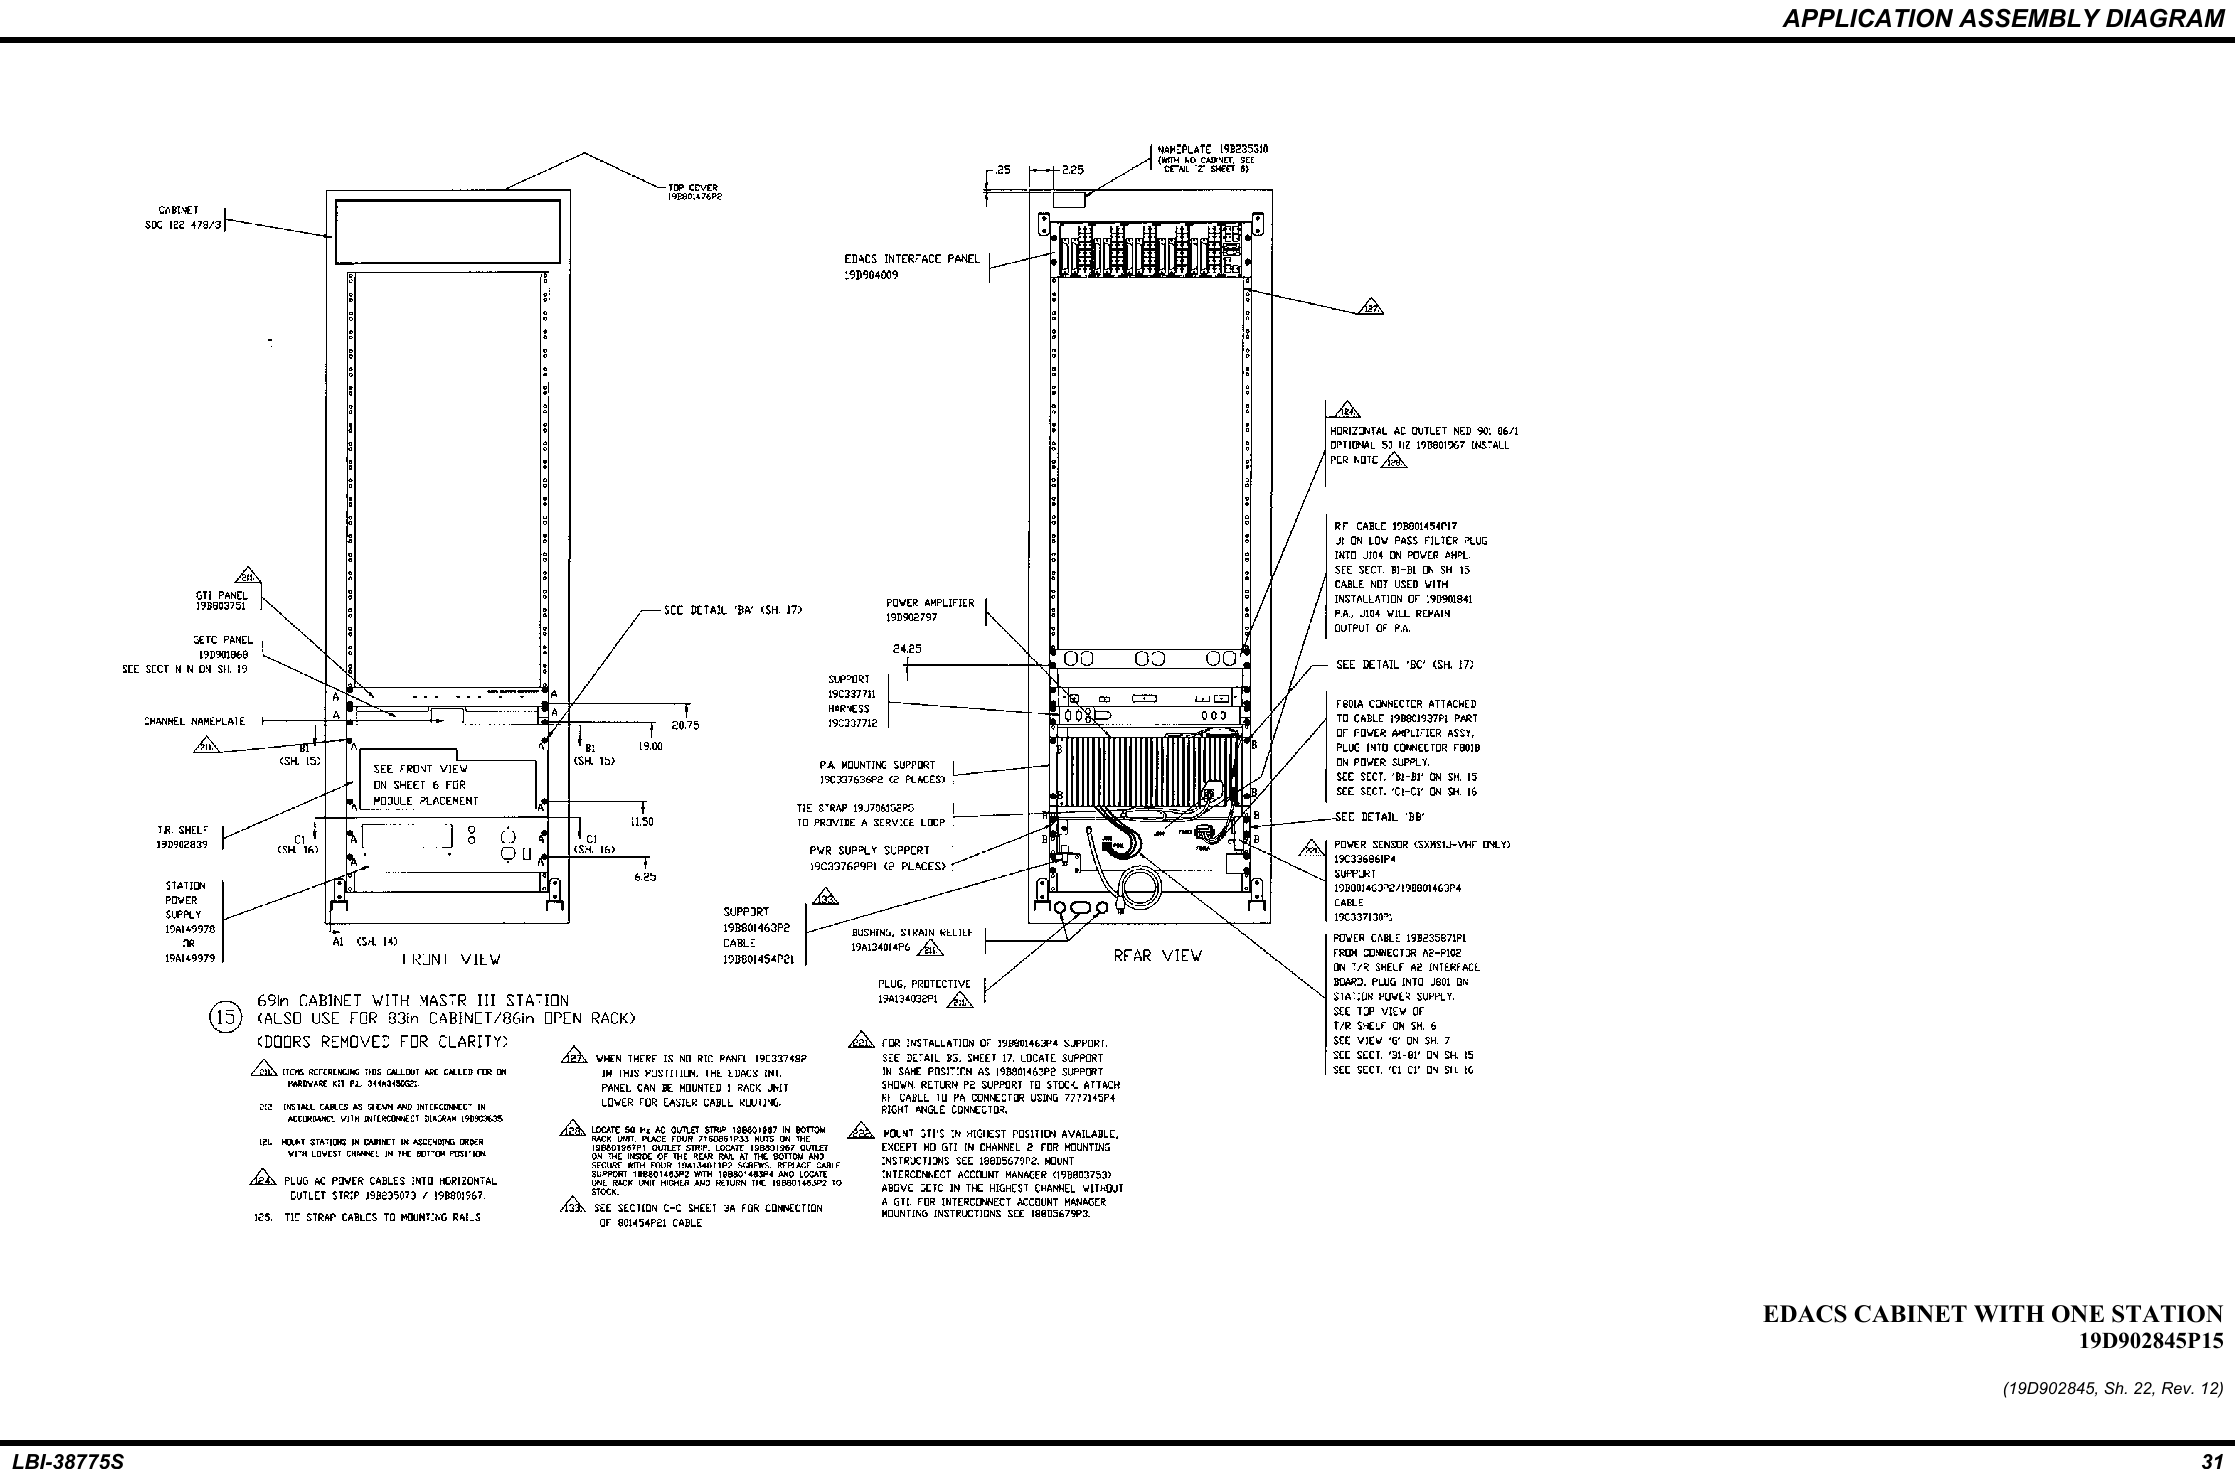 APPLICATION ASSEMBLY DIAGRAMLBI-38775S 31EDACS CABINET WITH ONE STATION19D902845P15(19D902845, Sh. 22, Rev. 12)